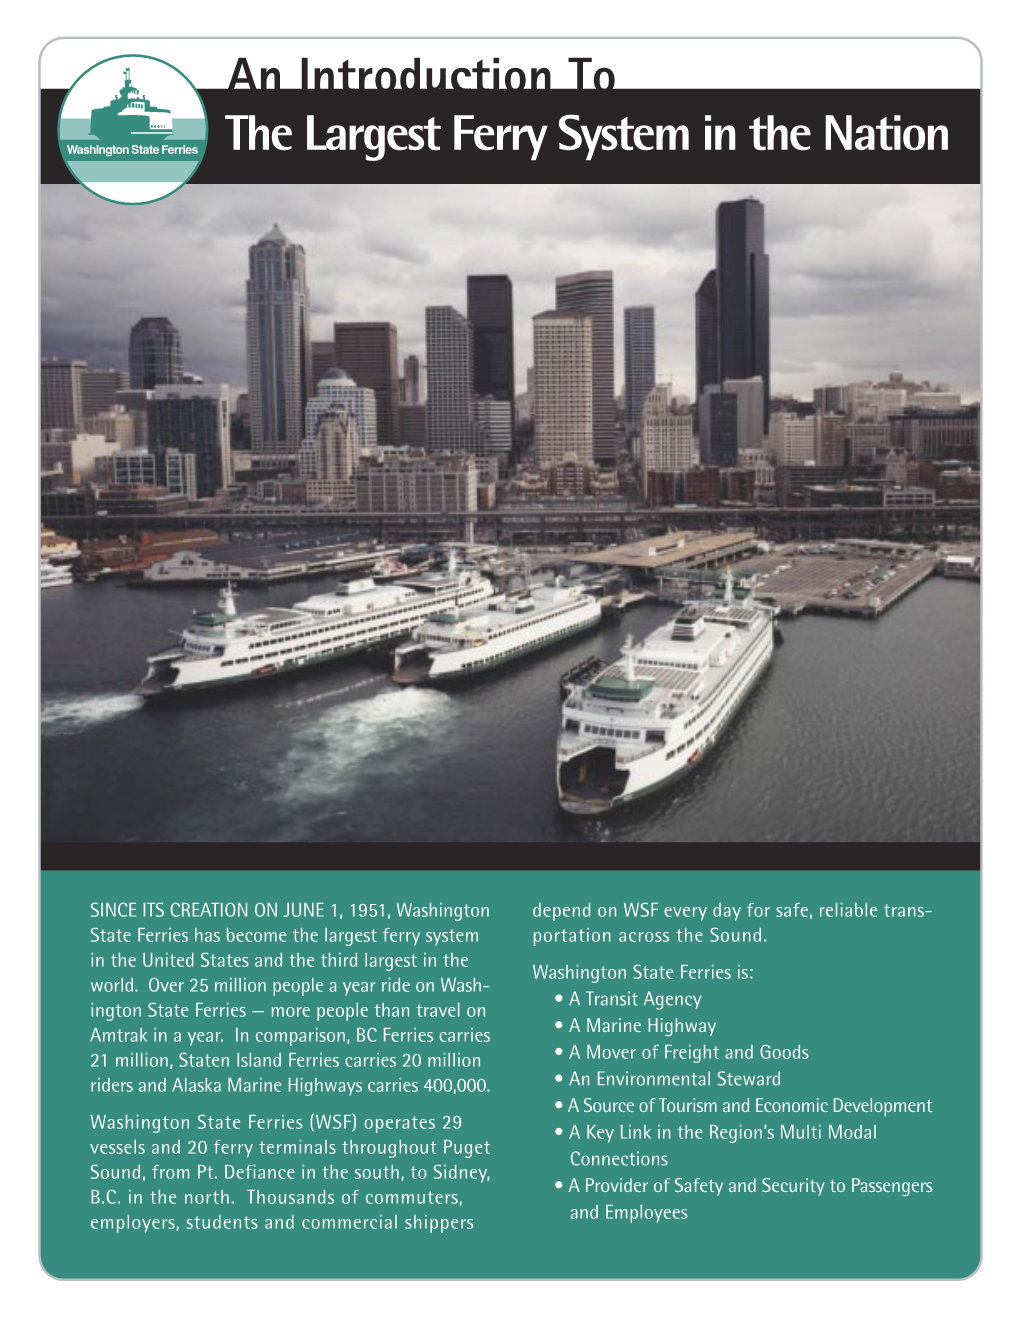 An Introduction to the Largest Ferry System in the Nation